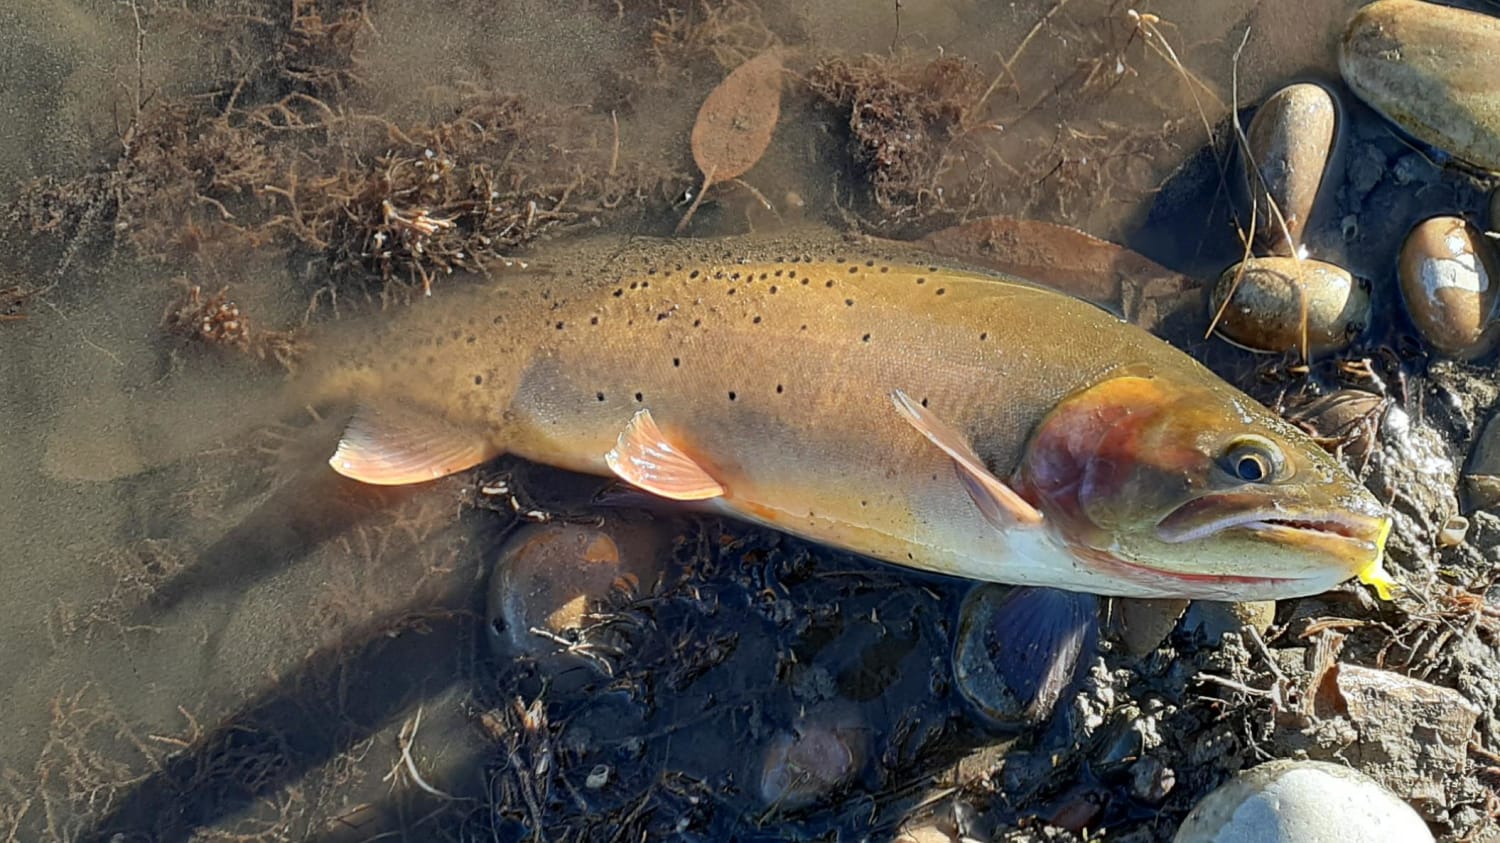 Native Yellowstone Cutthroat on a trout magnet, South Fork Snake River, ID